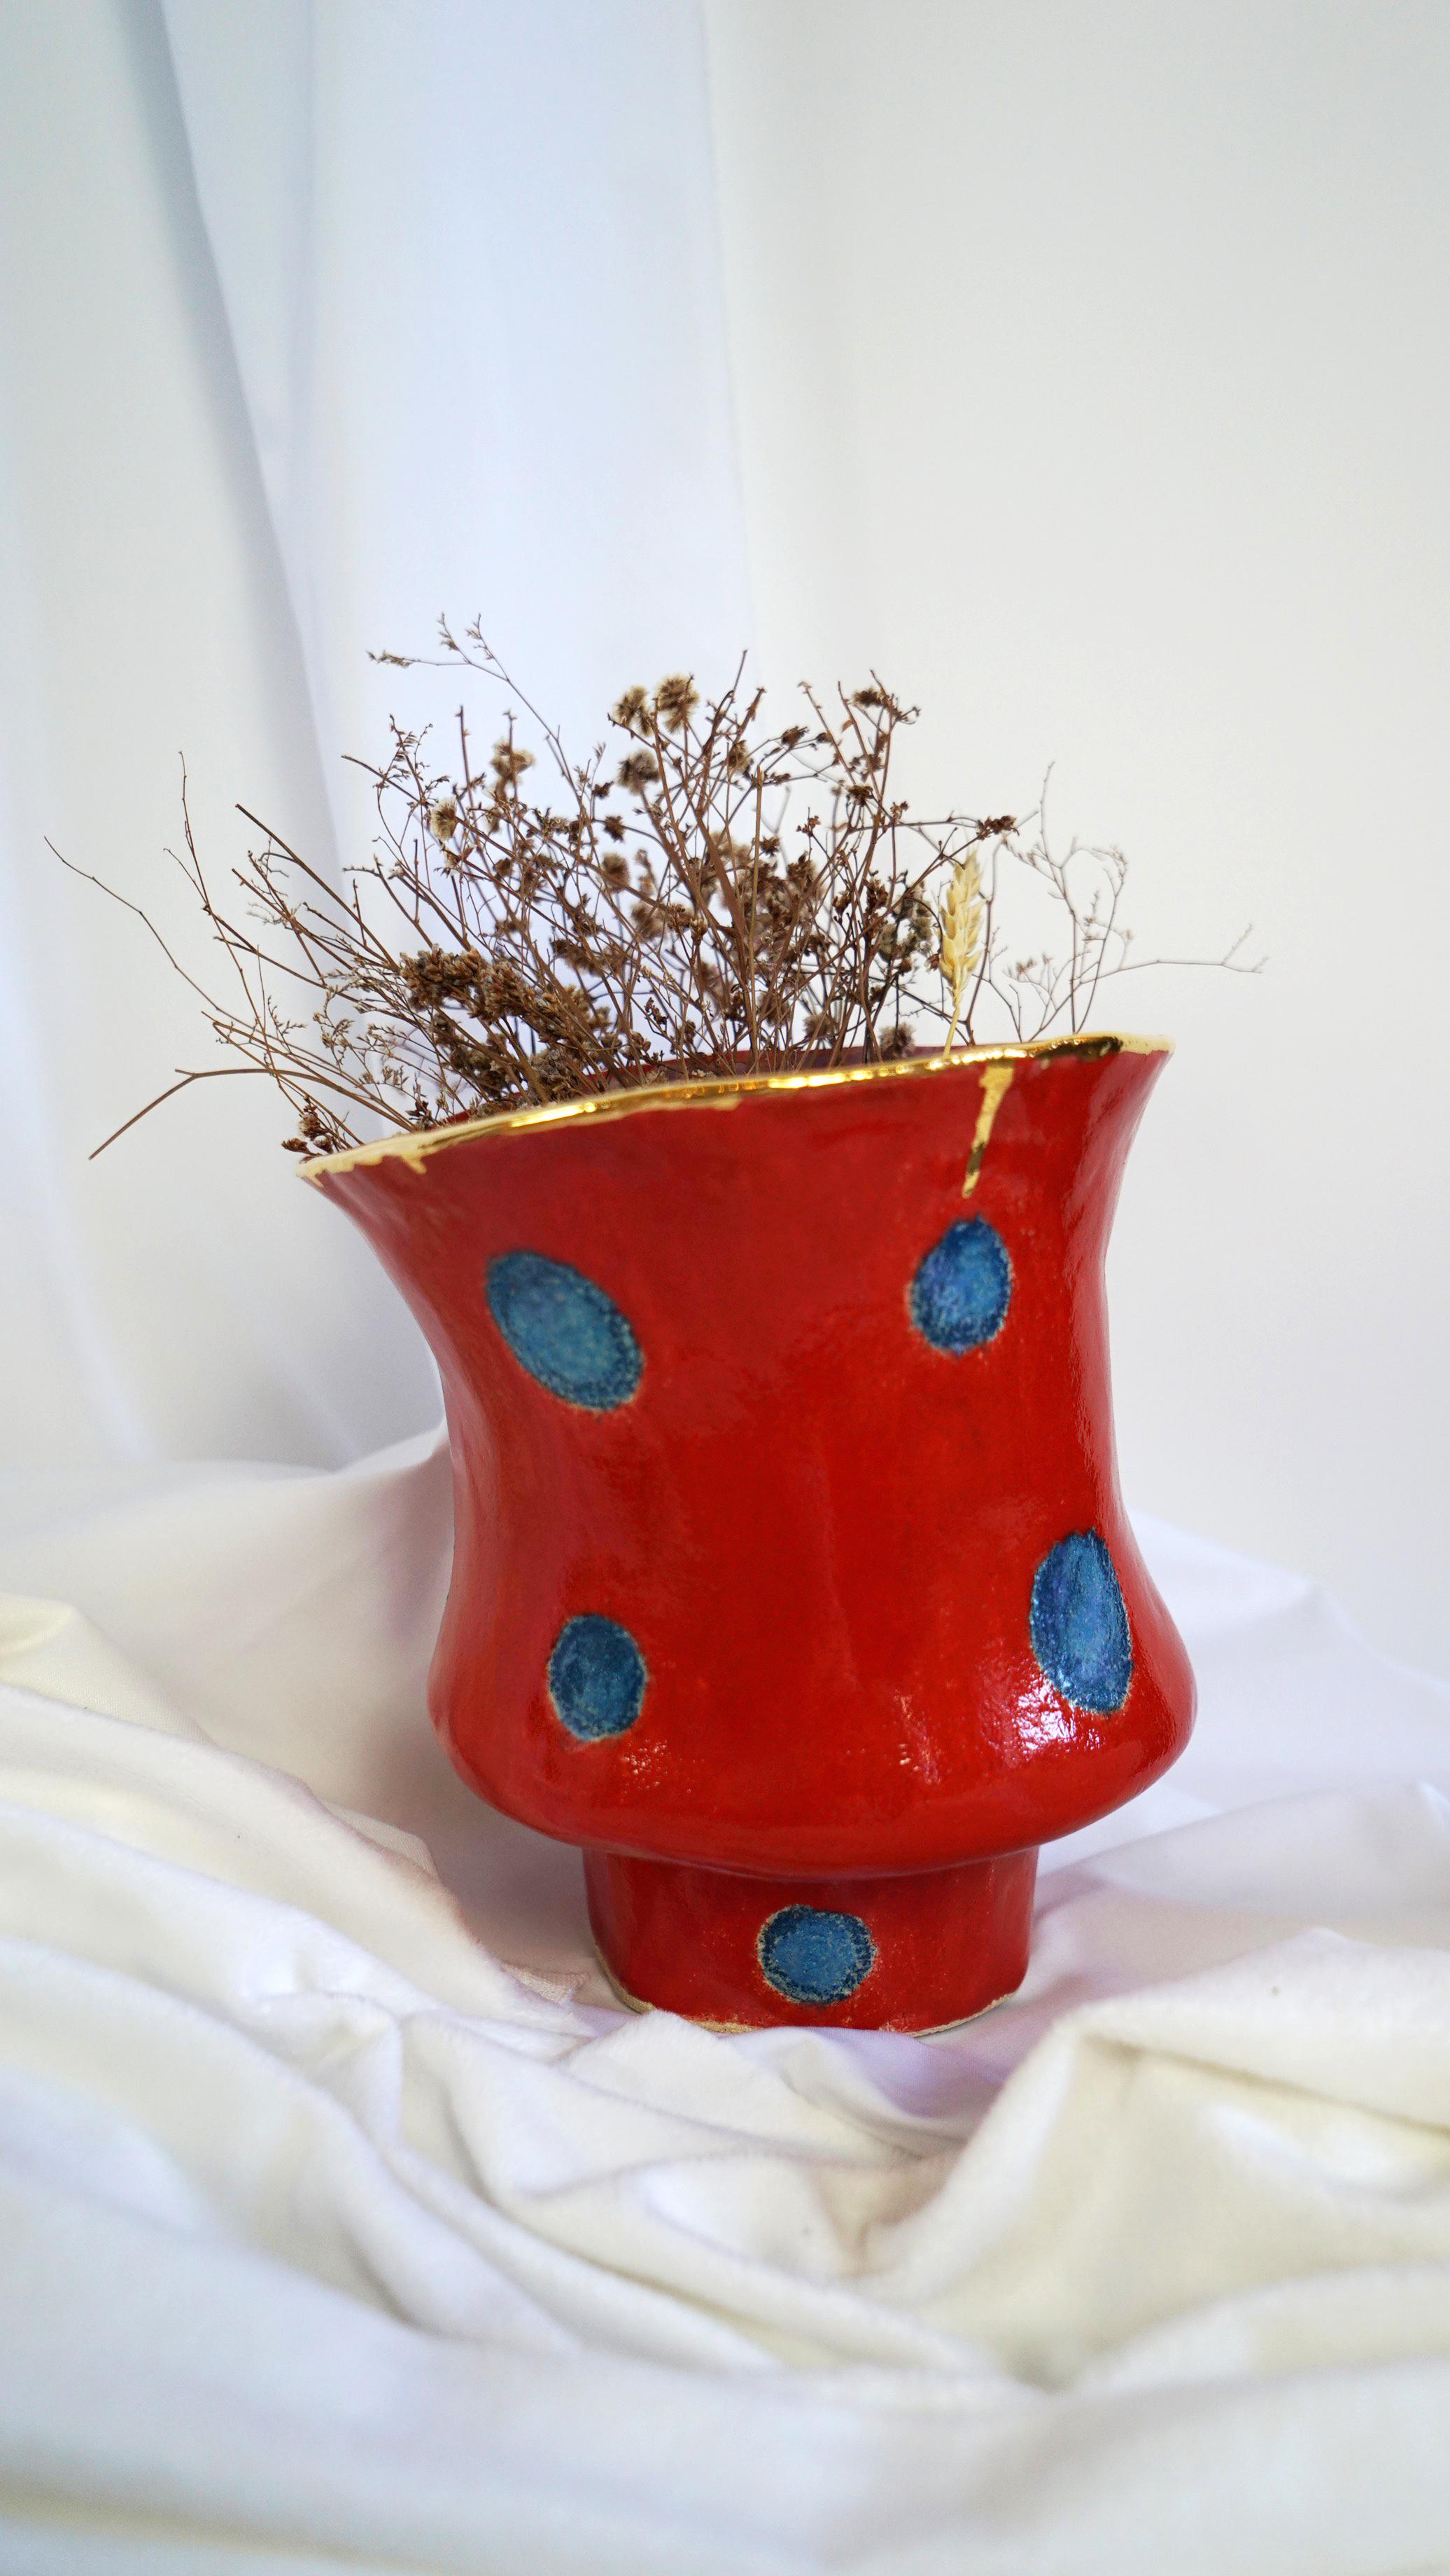 Olé 5 Vase by Hania Jneid
Unique Piece.
Dimensions: Ø 20 x H 20 cm.
Materials: Stoneware, glaze and gold luster.

Numbered Olé Vase in the collection Olé, a tribute to the Flamenco culture. Color: Red on blue sketchy dots, Gold luster, Violet